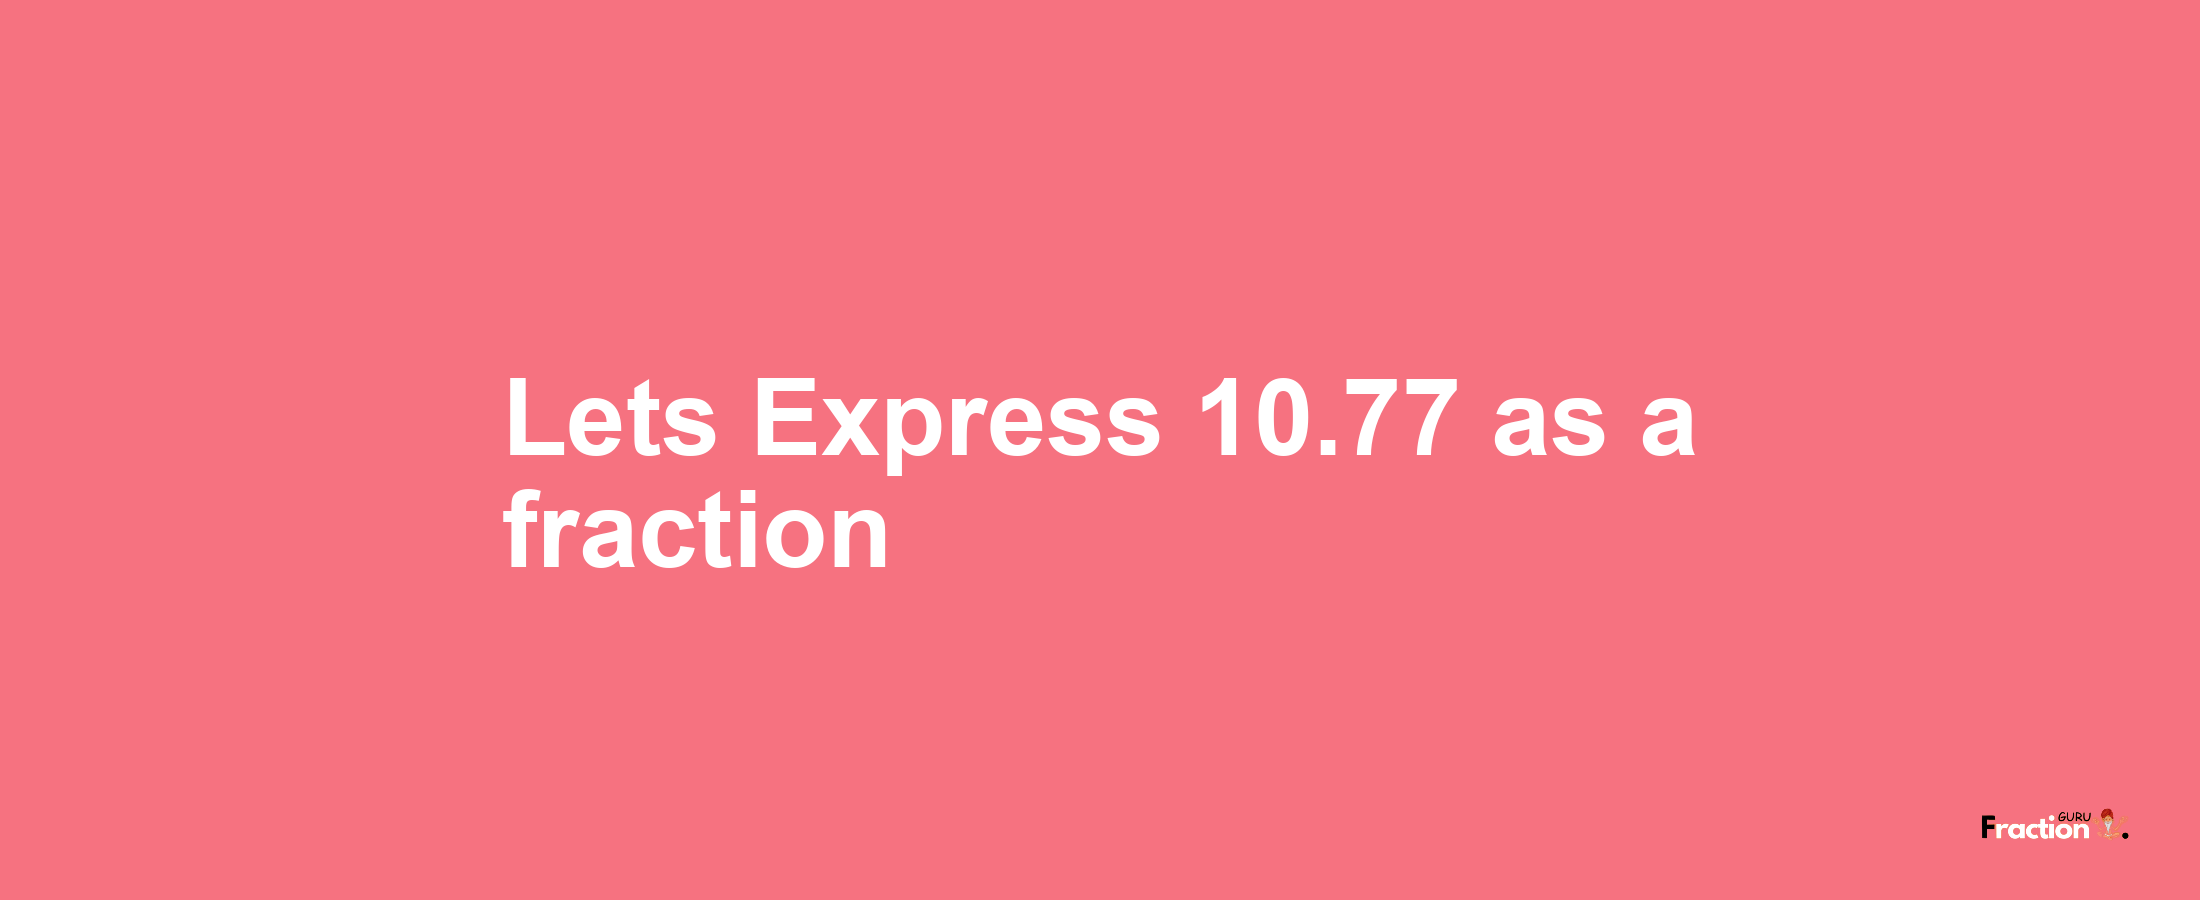 Lets Express 10.77 as afraction